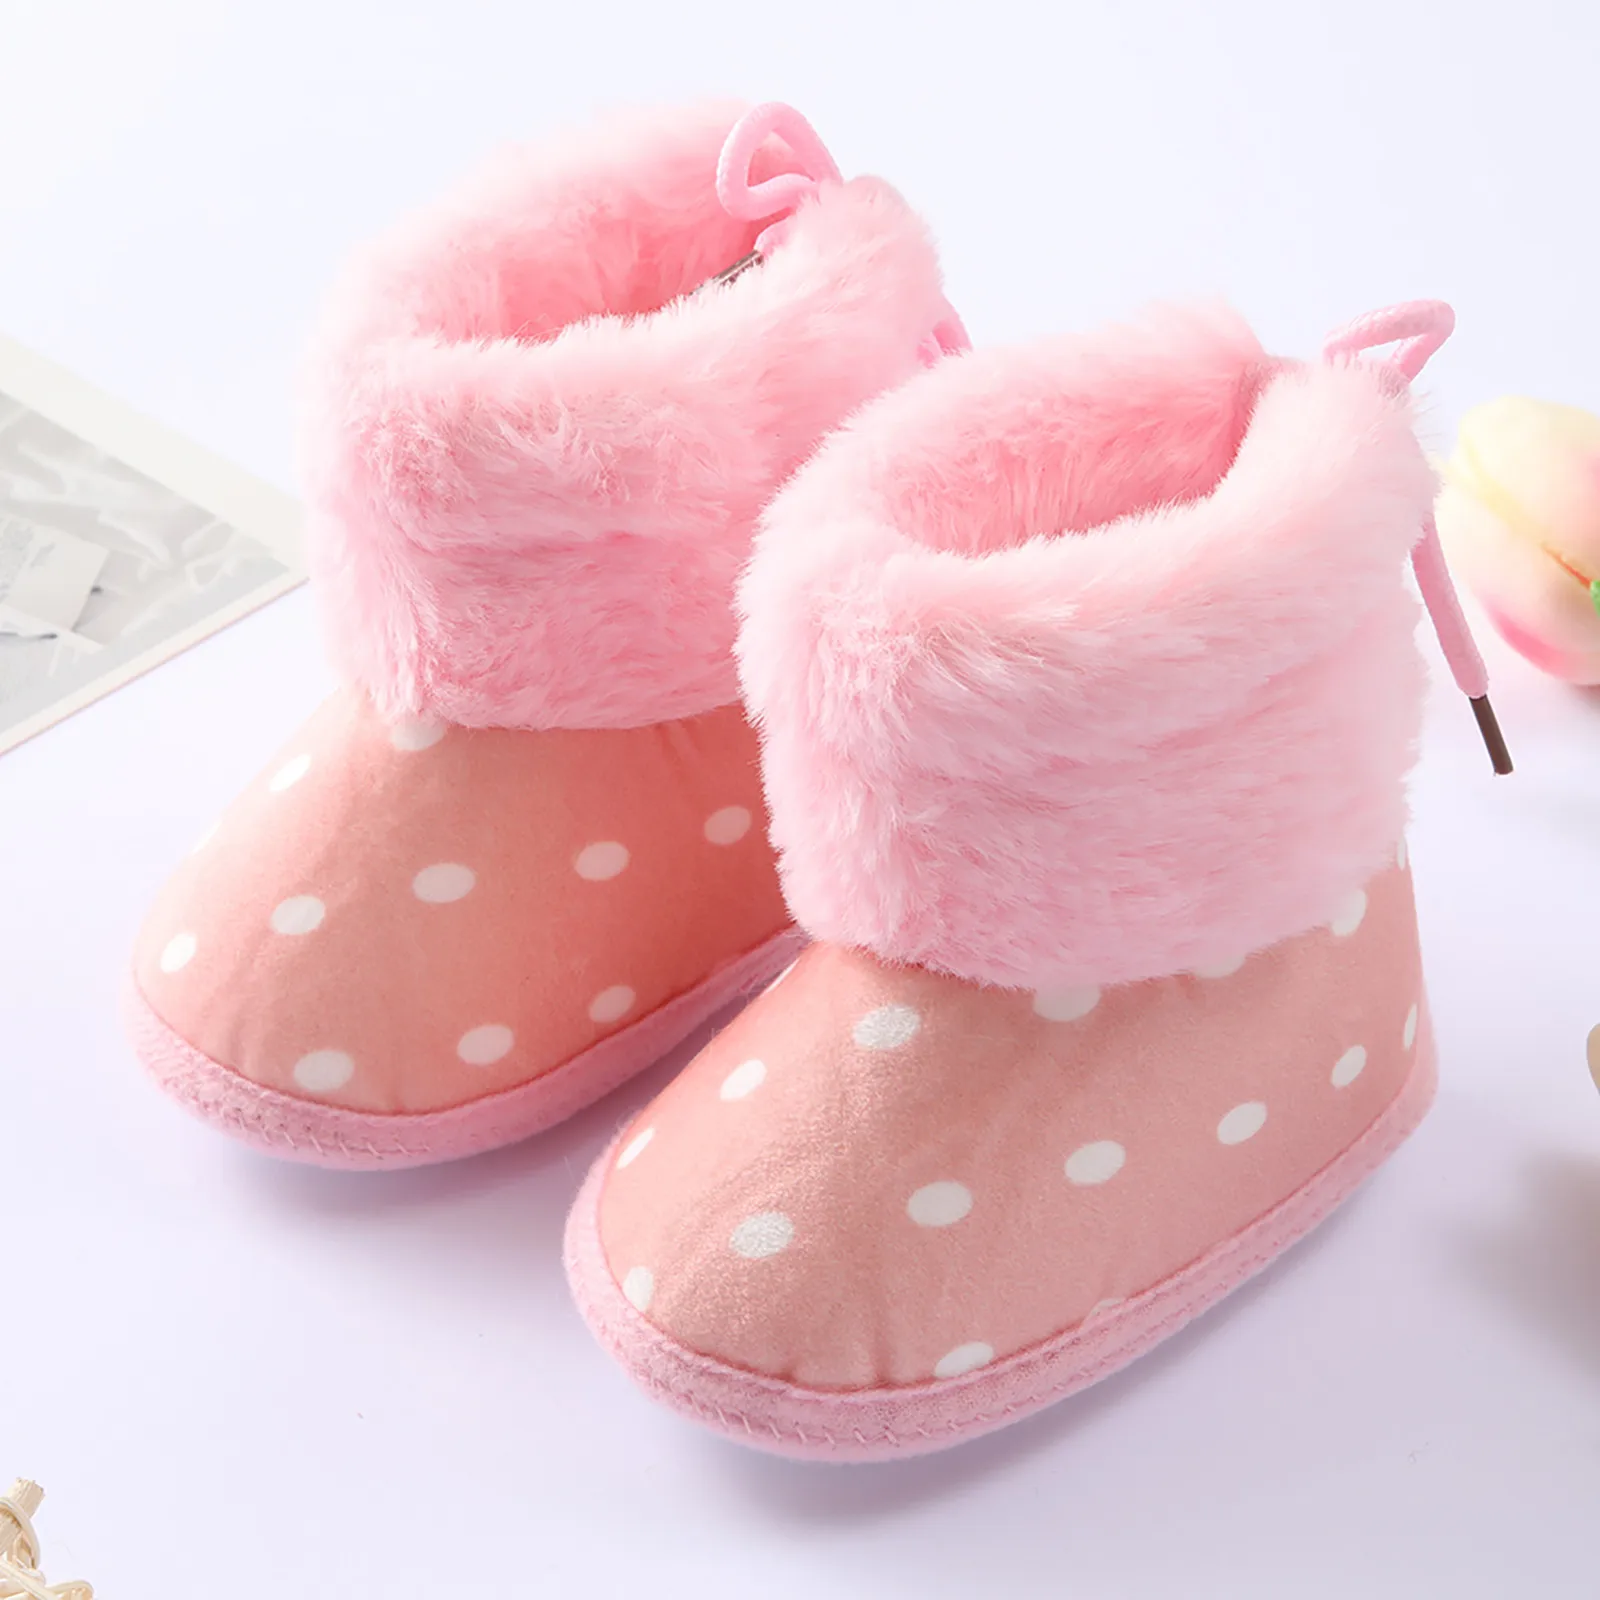 Infant Toddler Newborn Baby Girls Boys Soft Booties Snow Boots Warming Shoes 1 